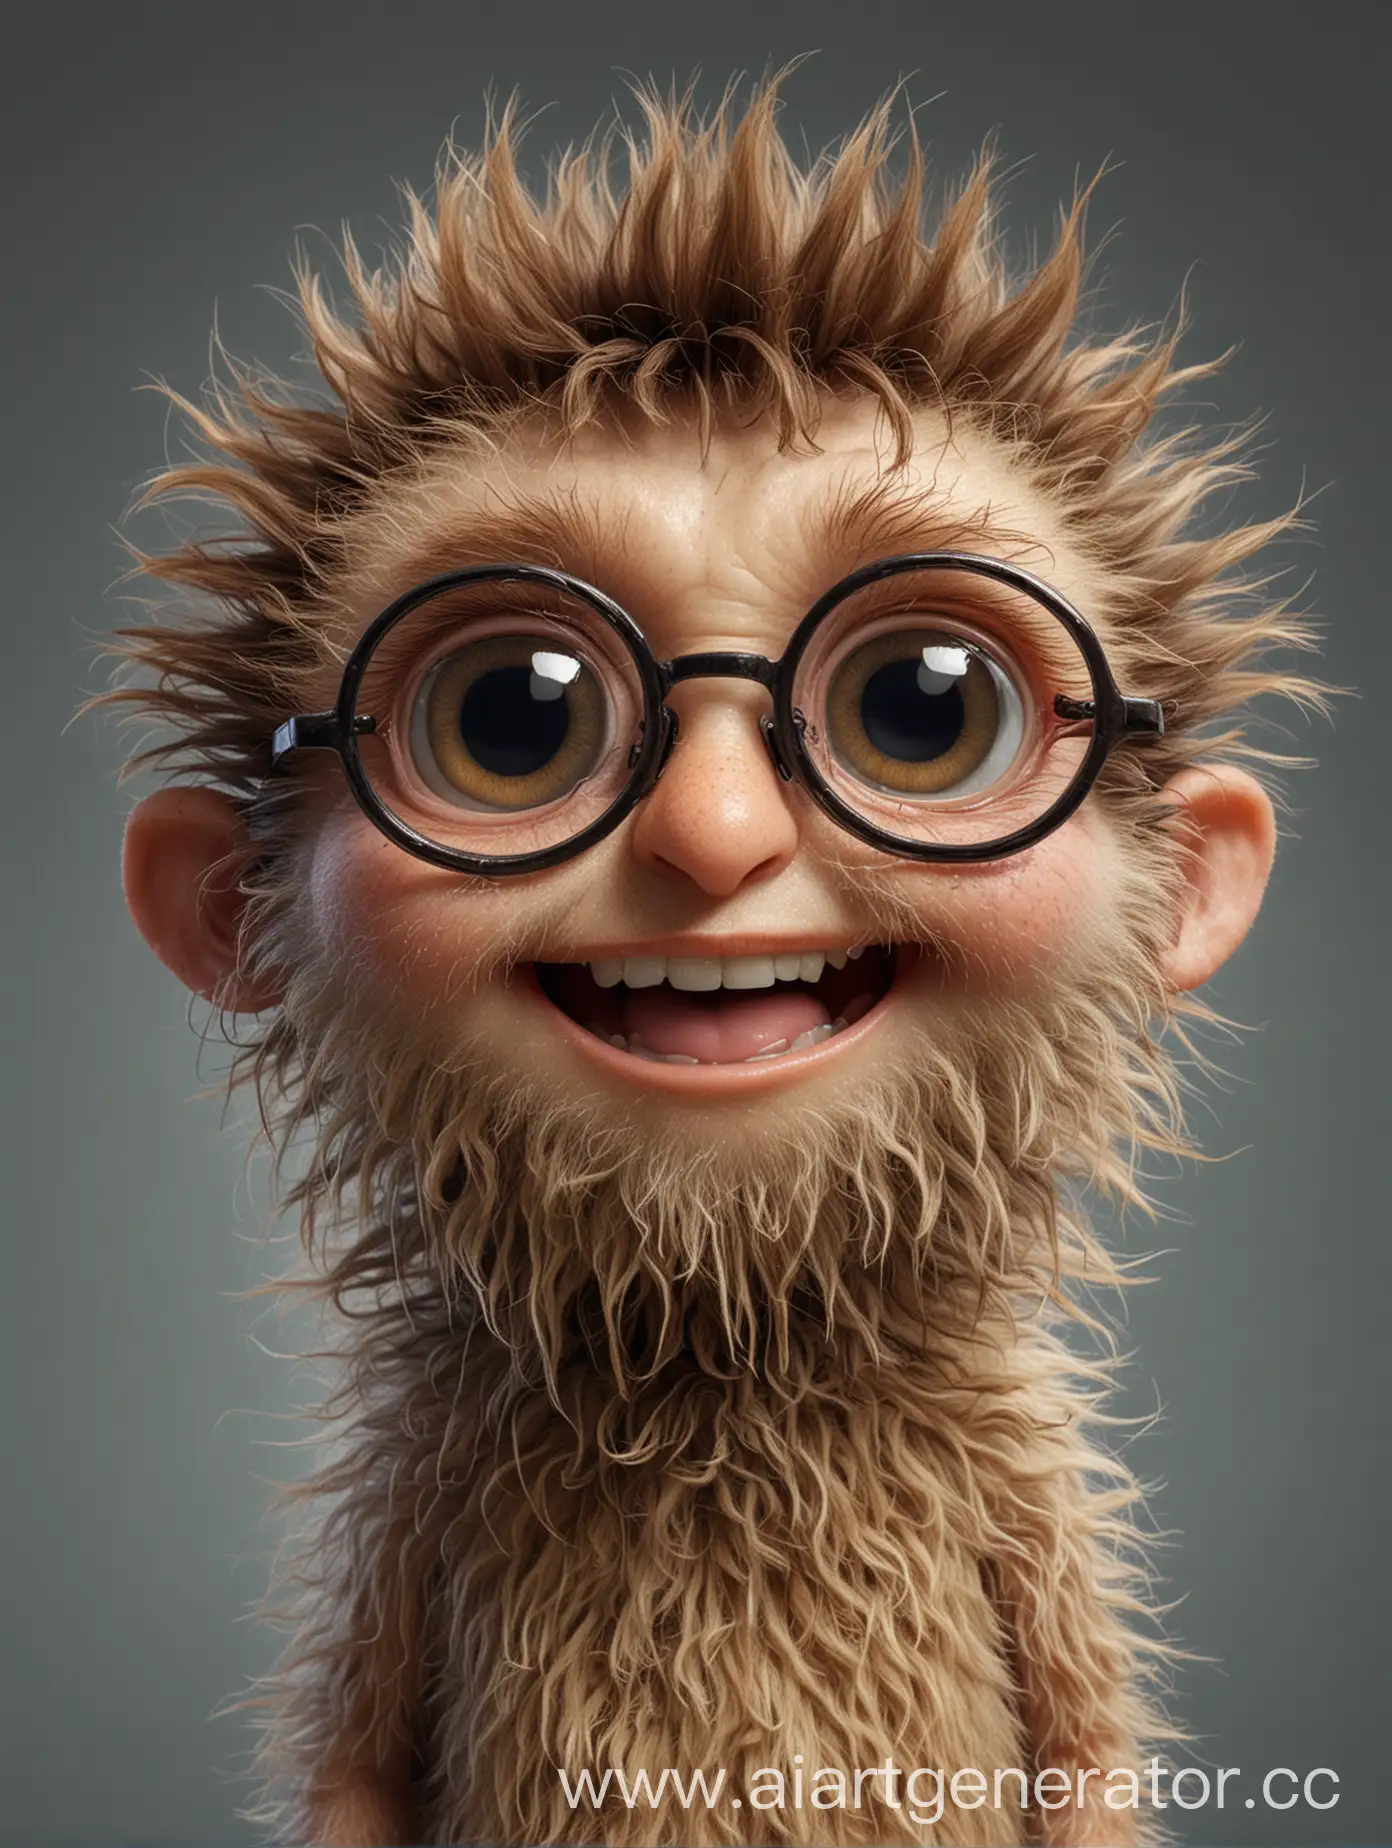 Hyperrealistic-Smiling-Hairy-Head-with-Big-Eyes-and-Glasses